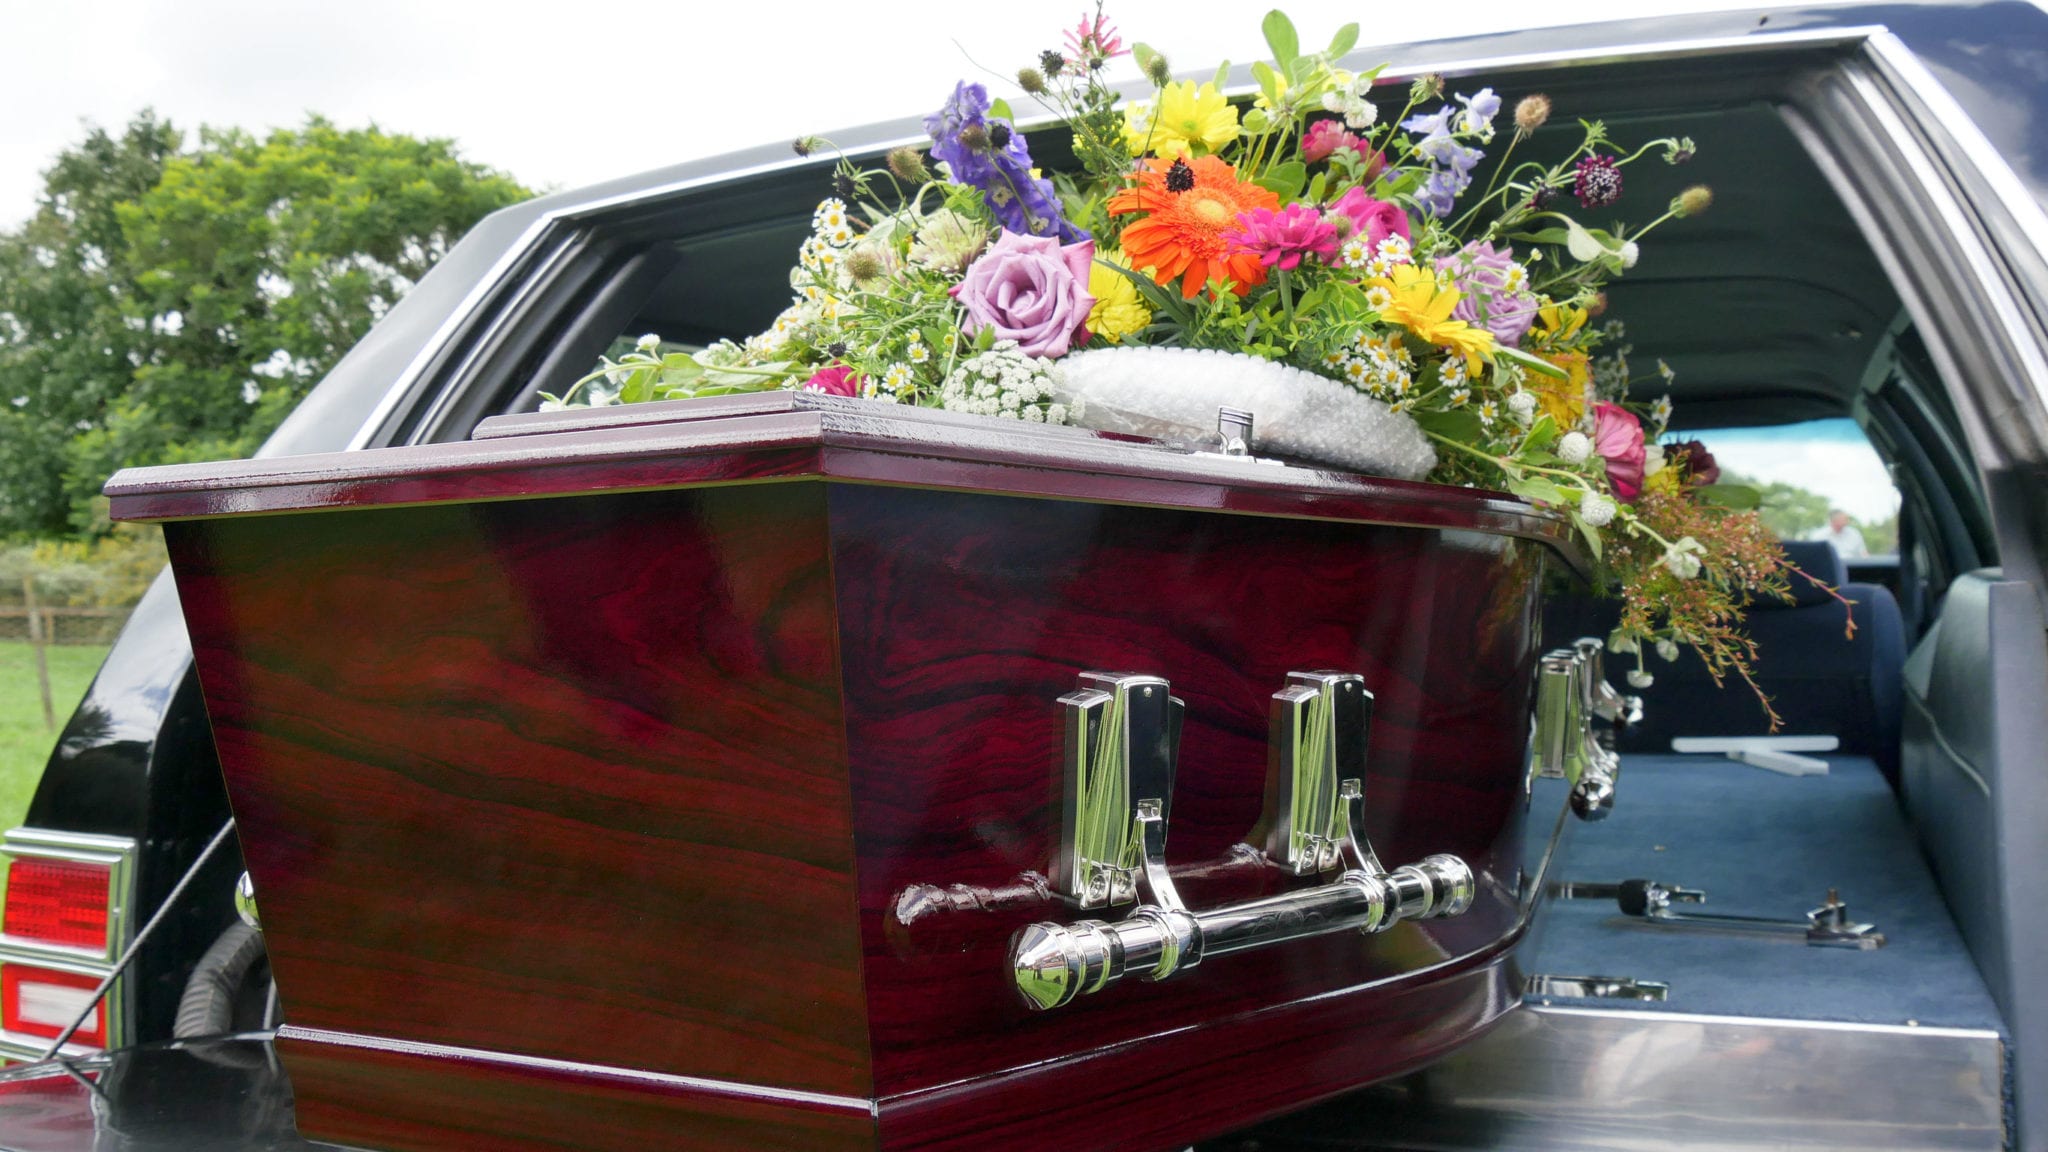 Florida Wrongful Death Claims Subject to "Discovery Rule"